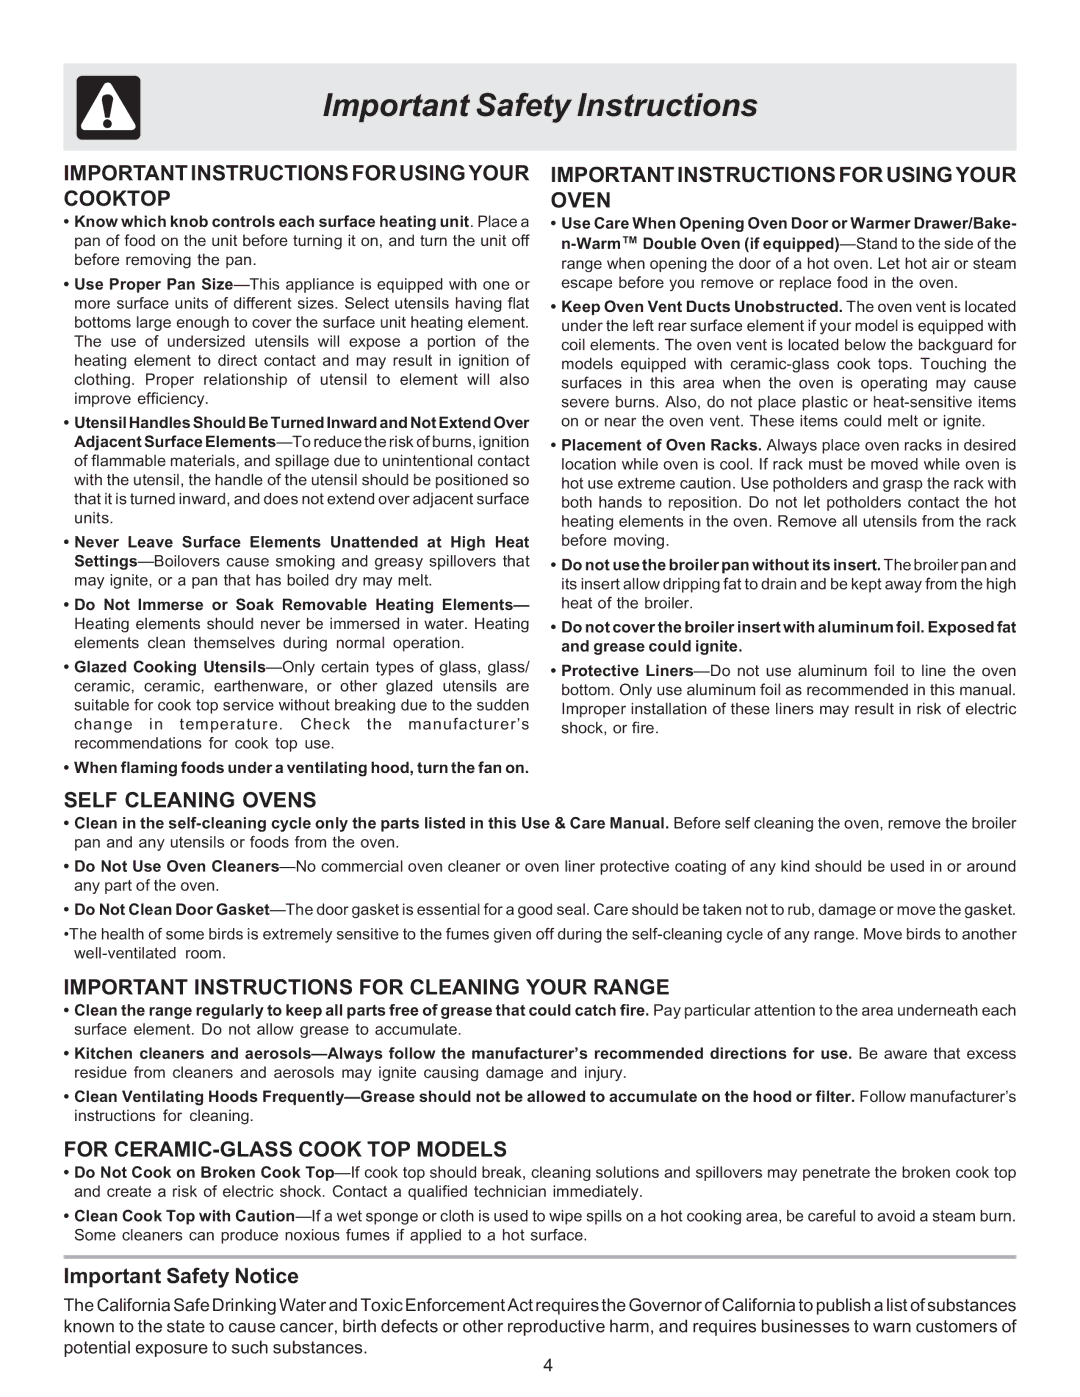 Frigidaire ES530 manual Important Instructions for Usingyour Cooktop, Important Safety Notice 